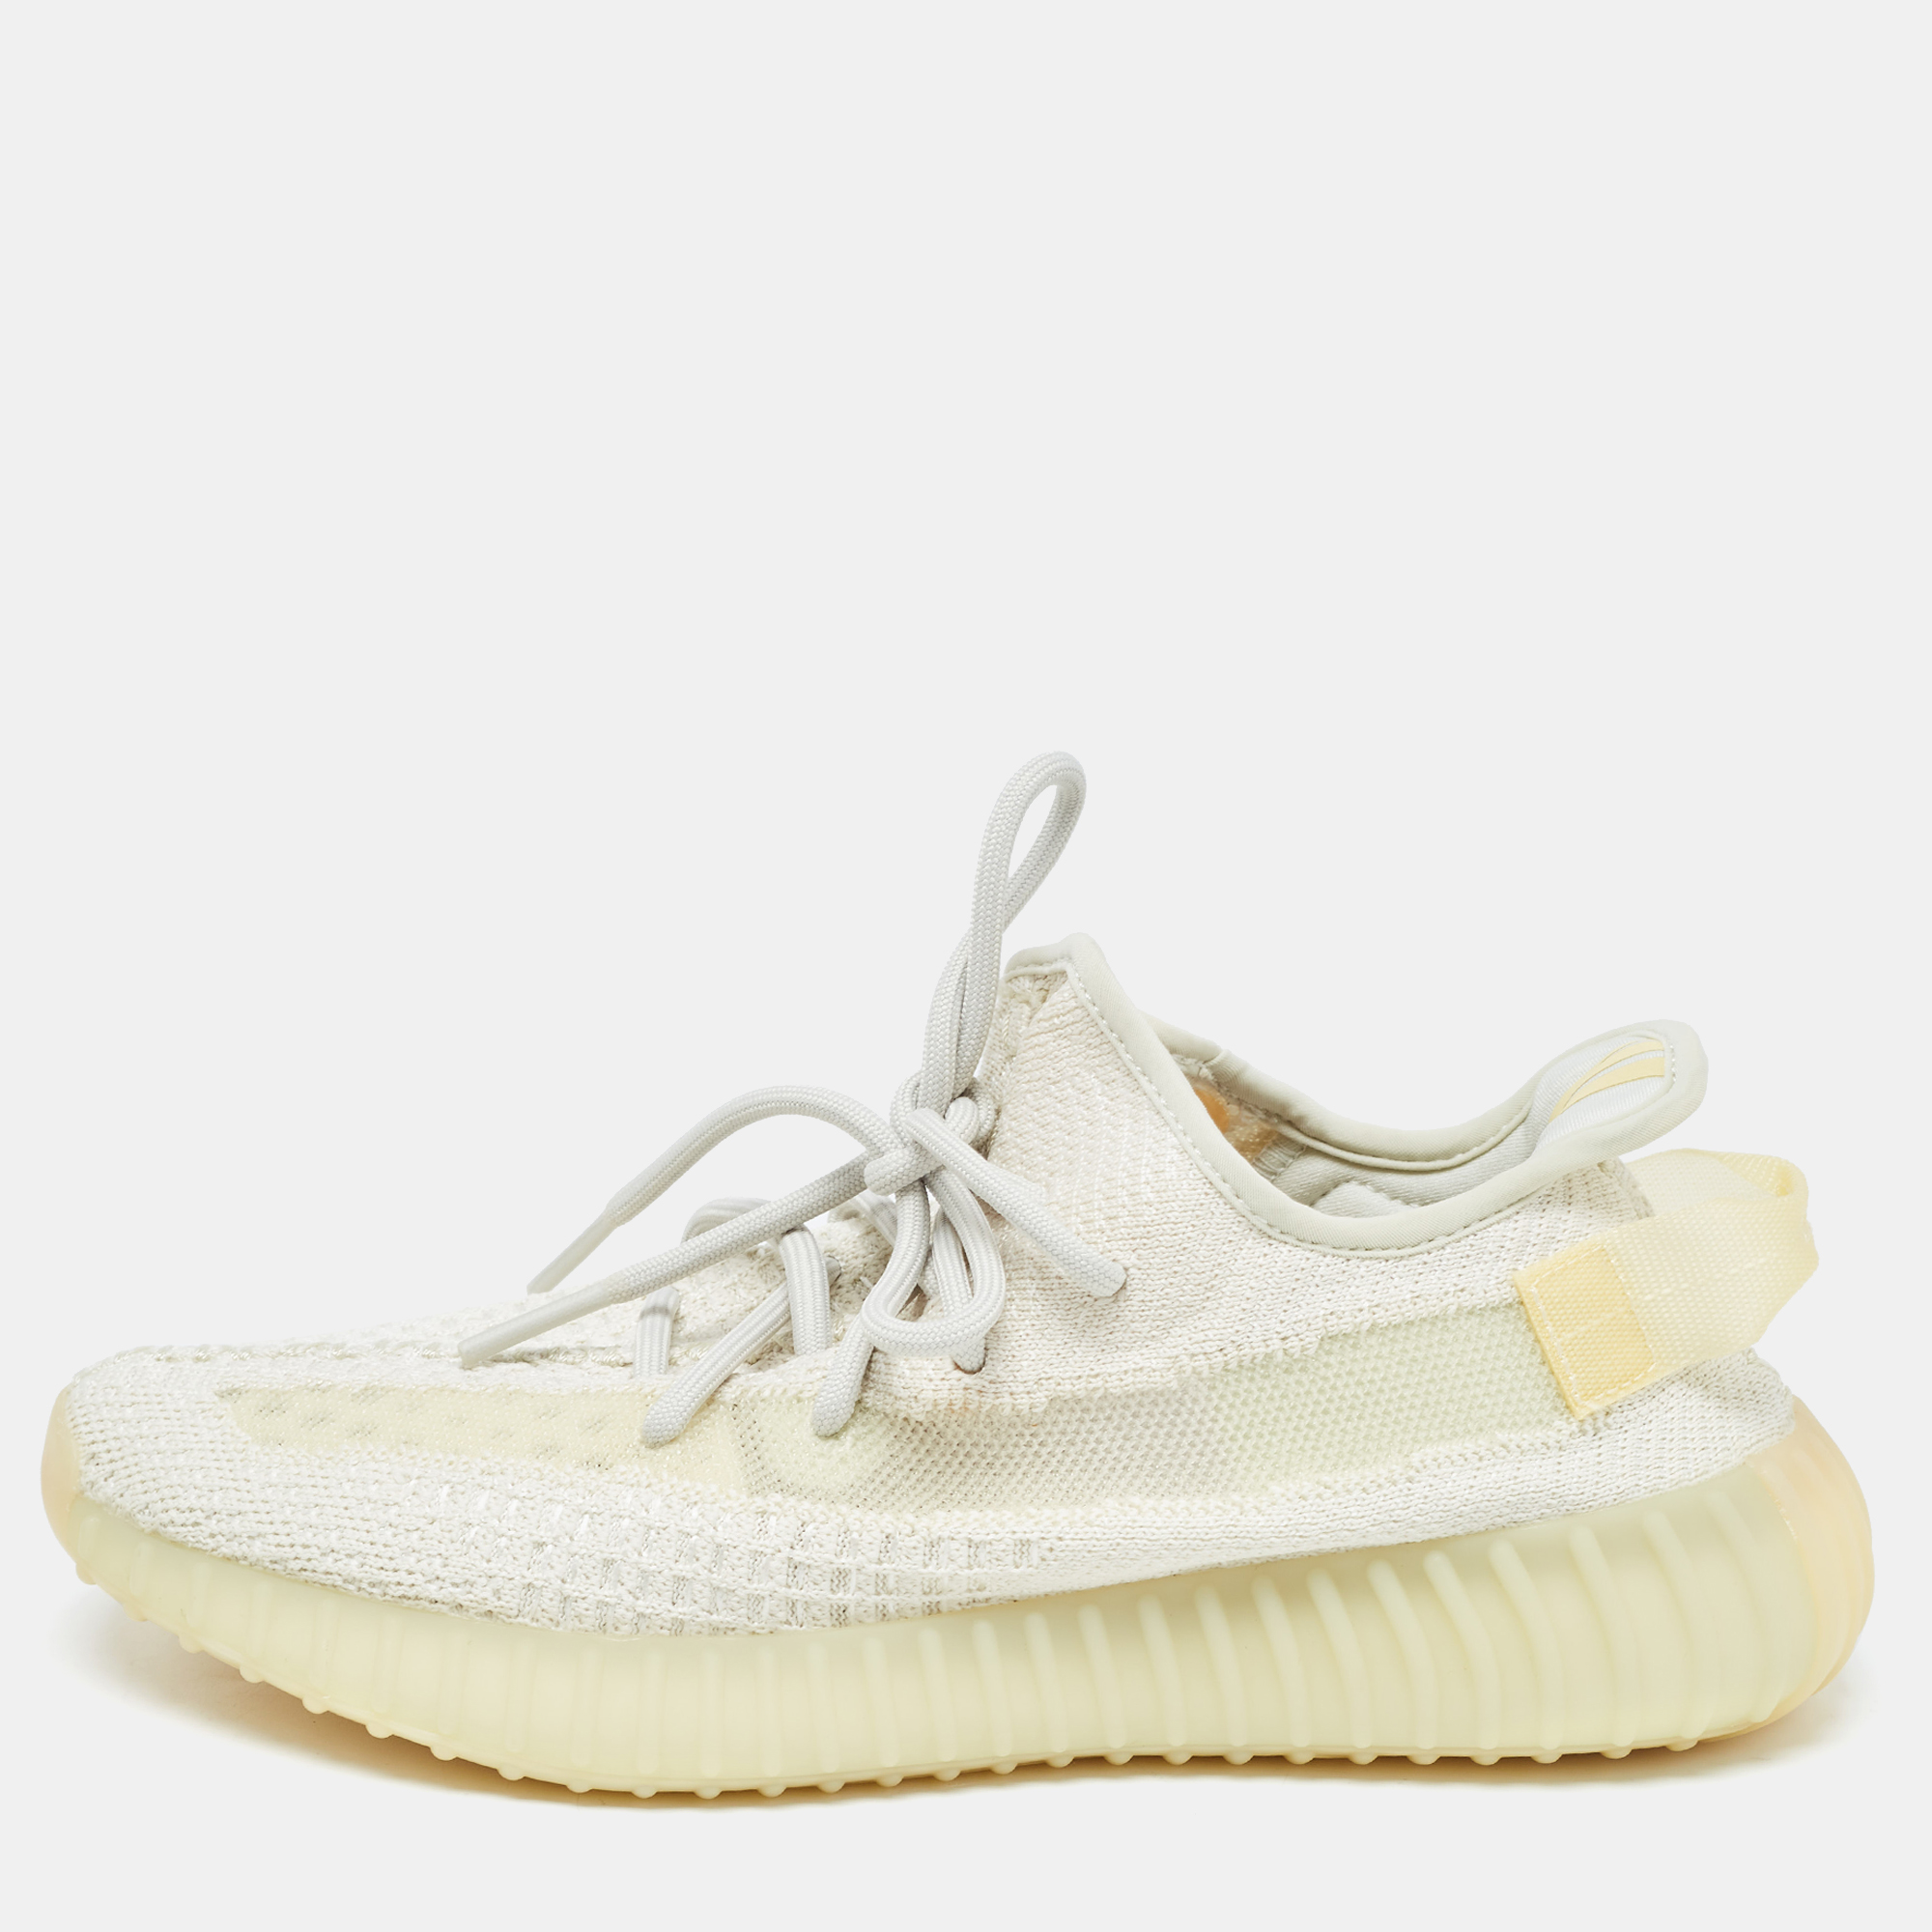 

Yeezy x adidas Cream Cotton Knit Fabric Boost 350 V2 Triple White Sneakers Size